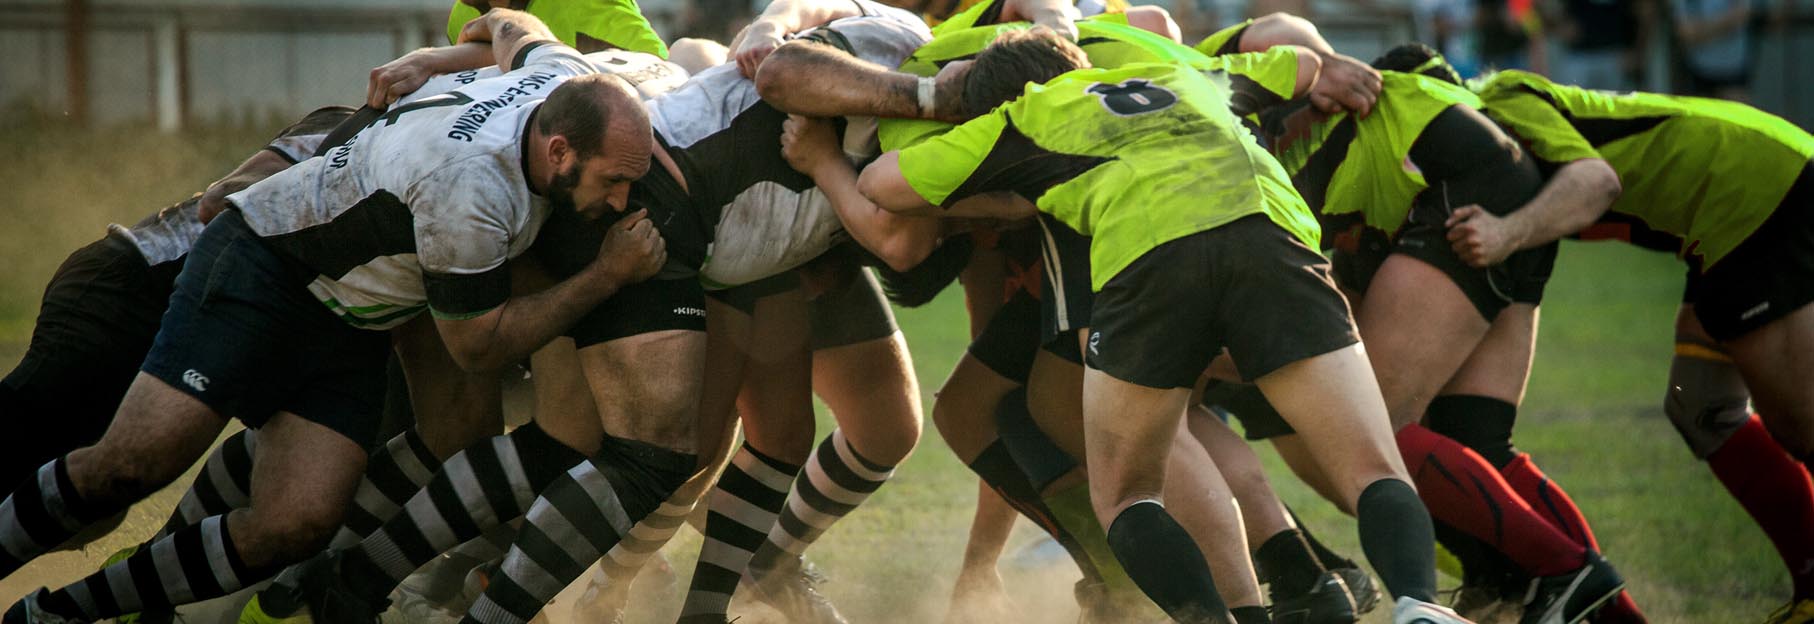 rugby players wearing a mouthguard during a game